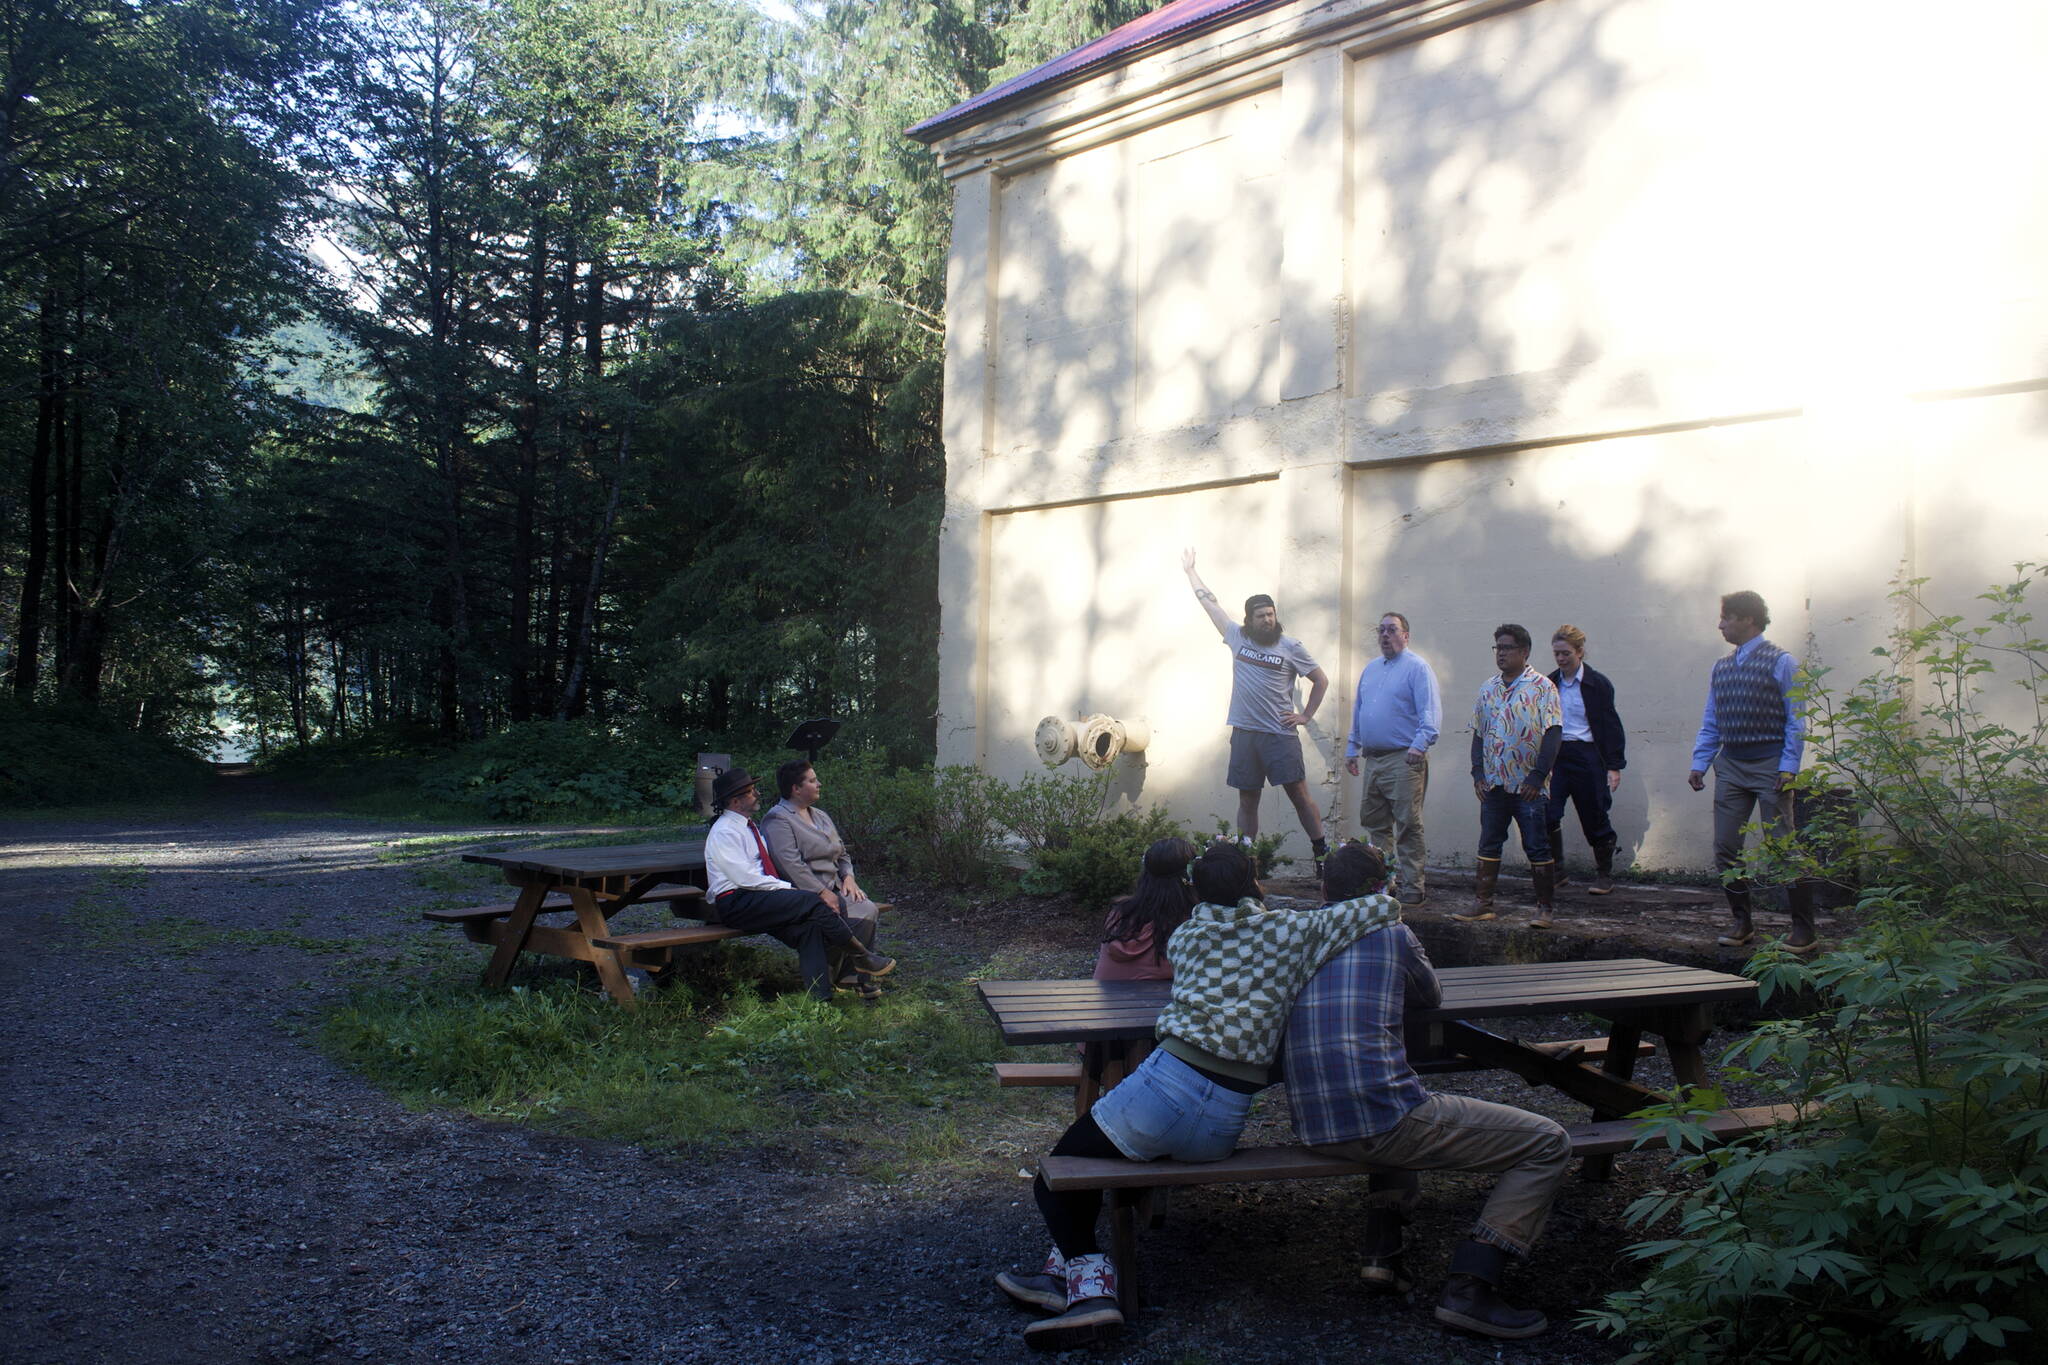 Theater Alaska actors rehearse for the outdoor production of “A Midsummer Night’s Dream” at the Treadwell Office Mine on Tuesday. Flordelino Lagundino, the play’s producing artistic director, said the restored historic structure offers plenty of variety to stage the scenes of the classic play focusing on irrational romanticism. (Mark Sabbatini / Juneau Empire)